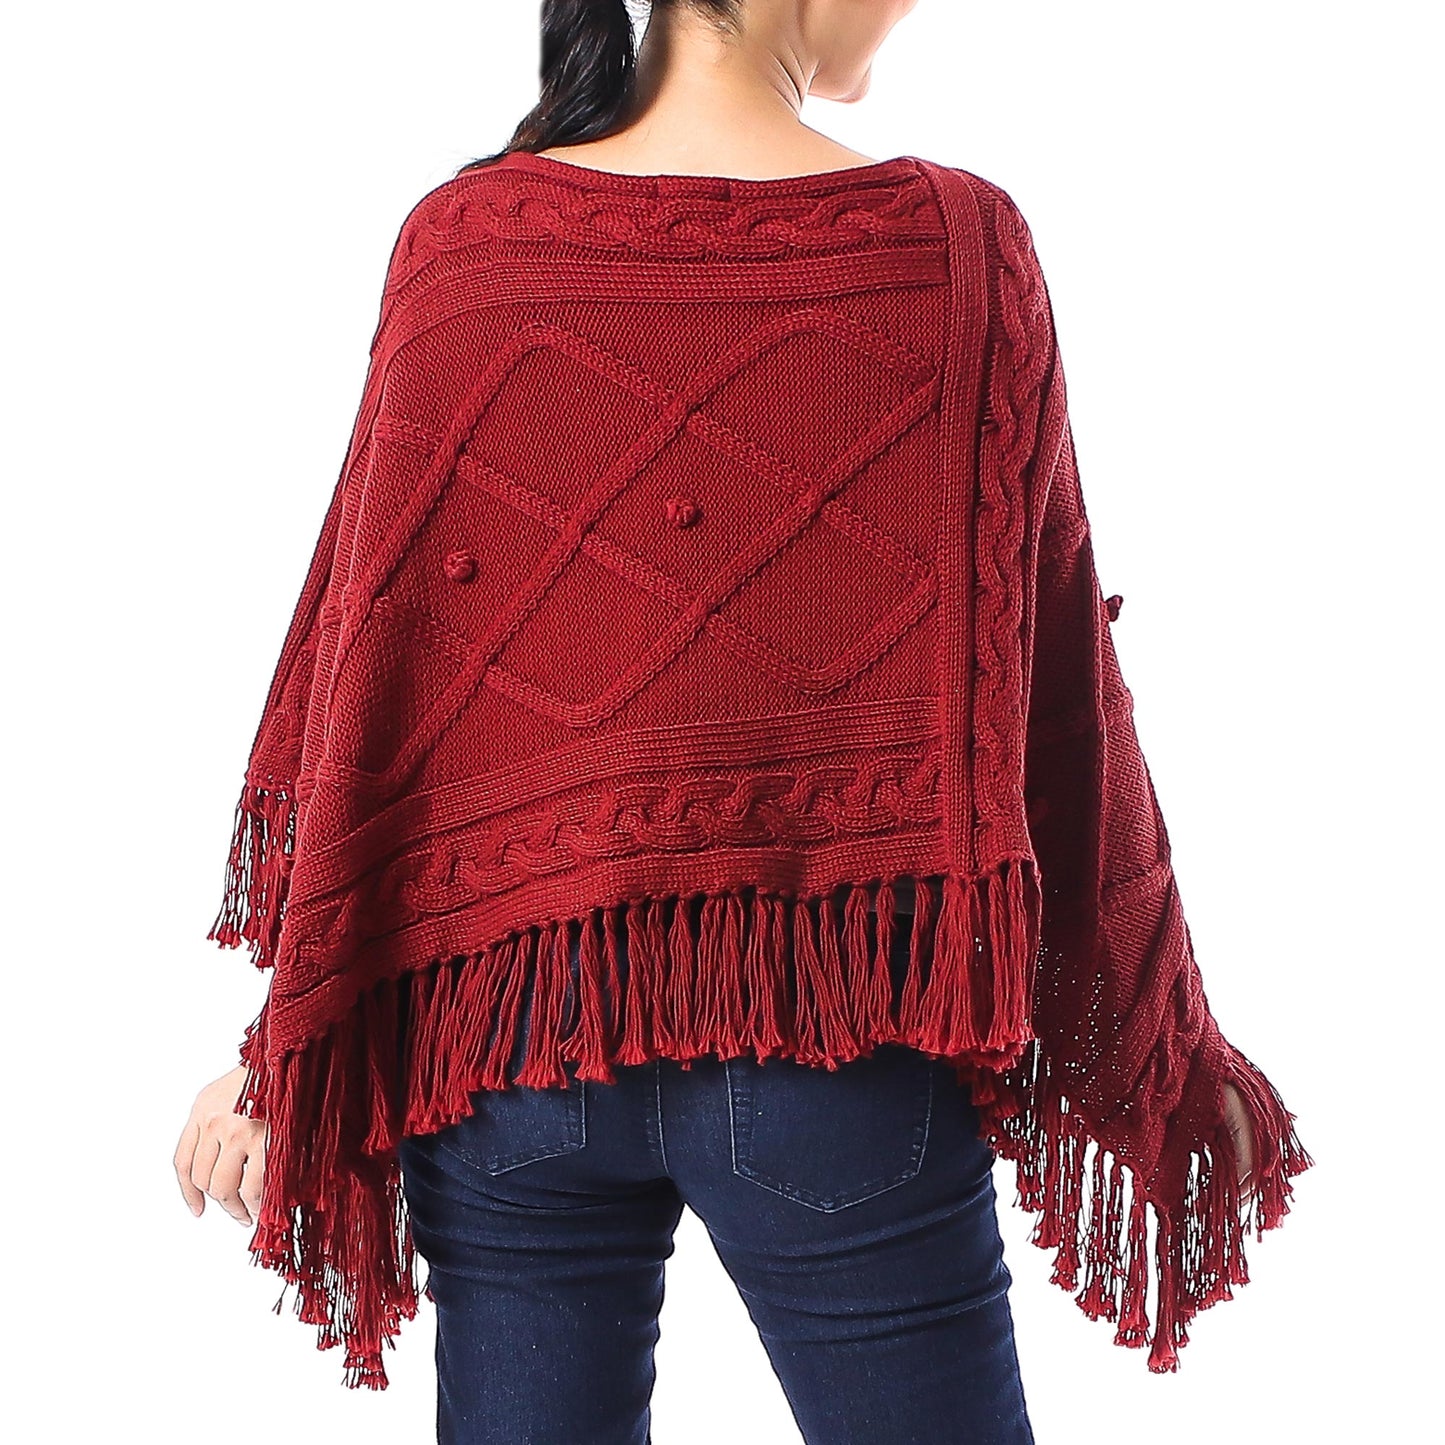 Incredible in Claret Short Knit Poncho in Claret from Thailand